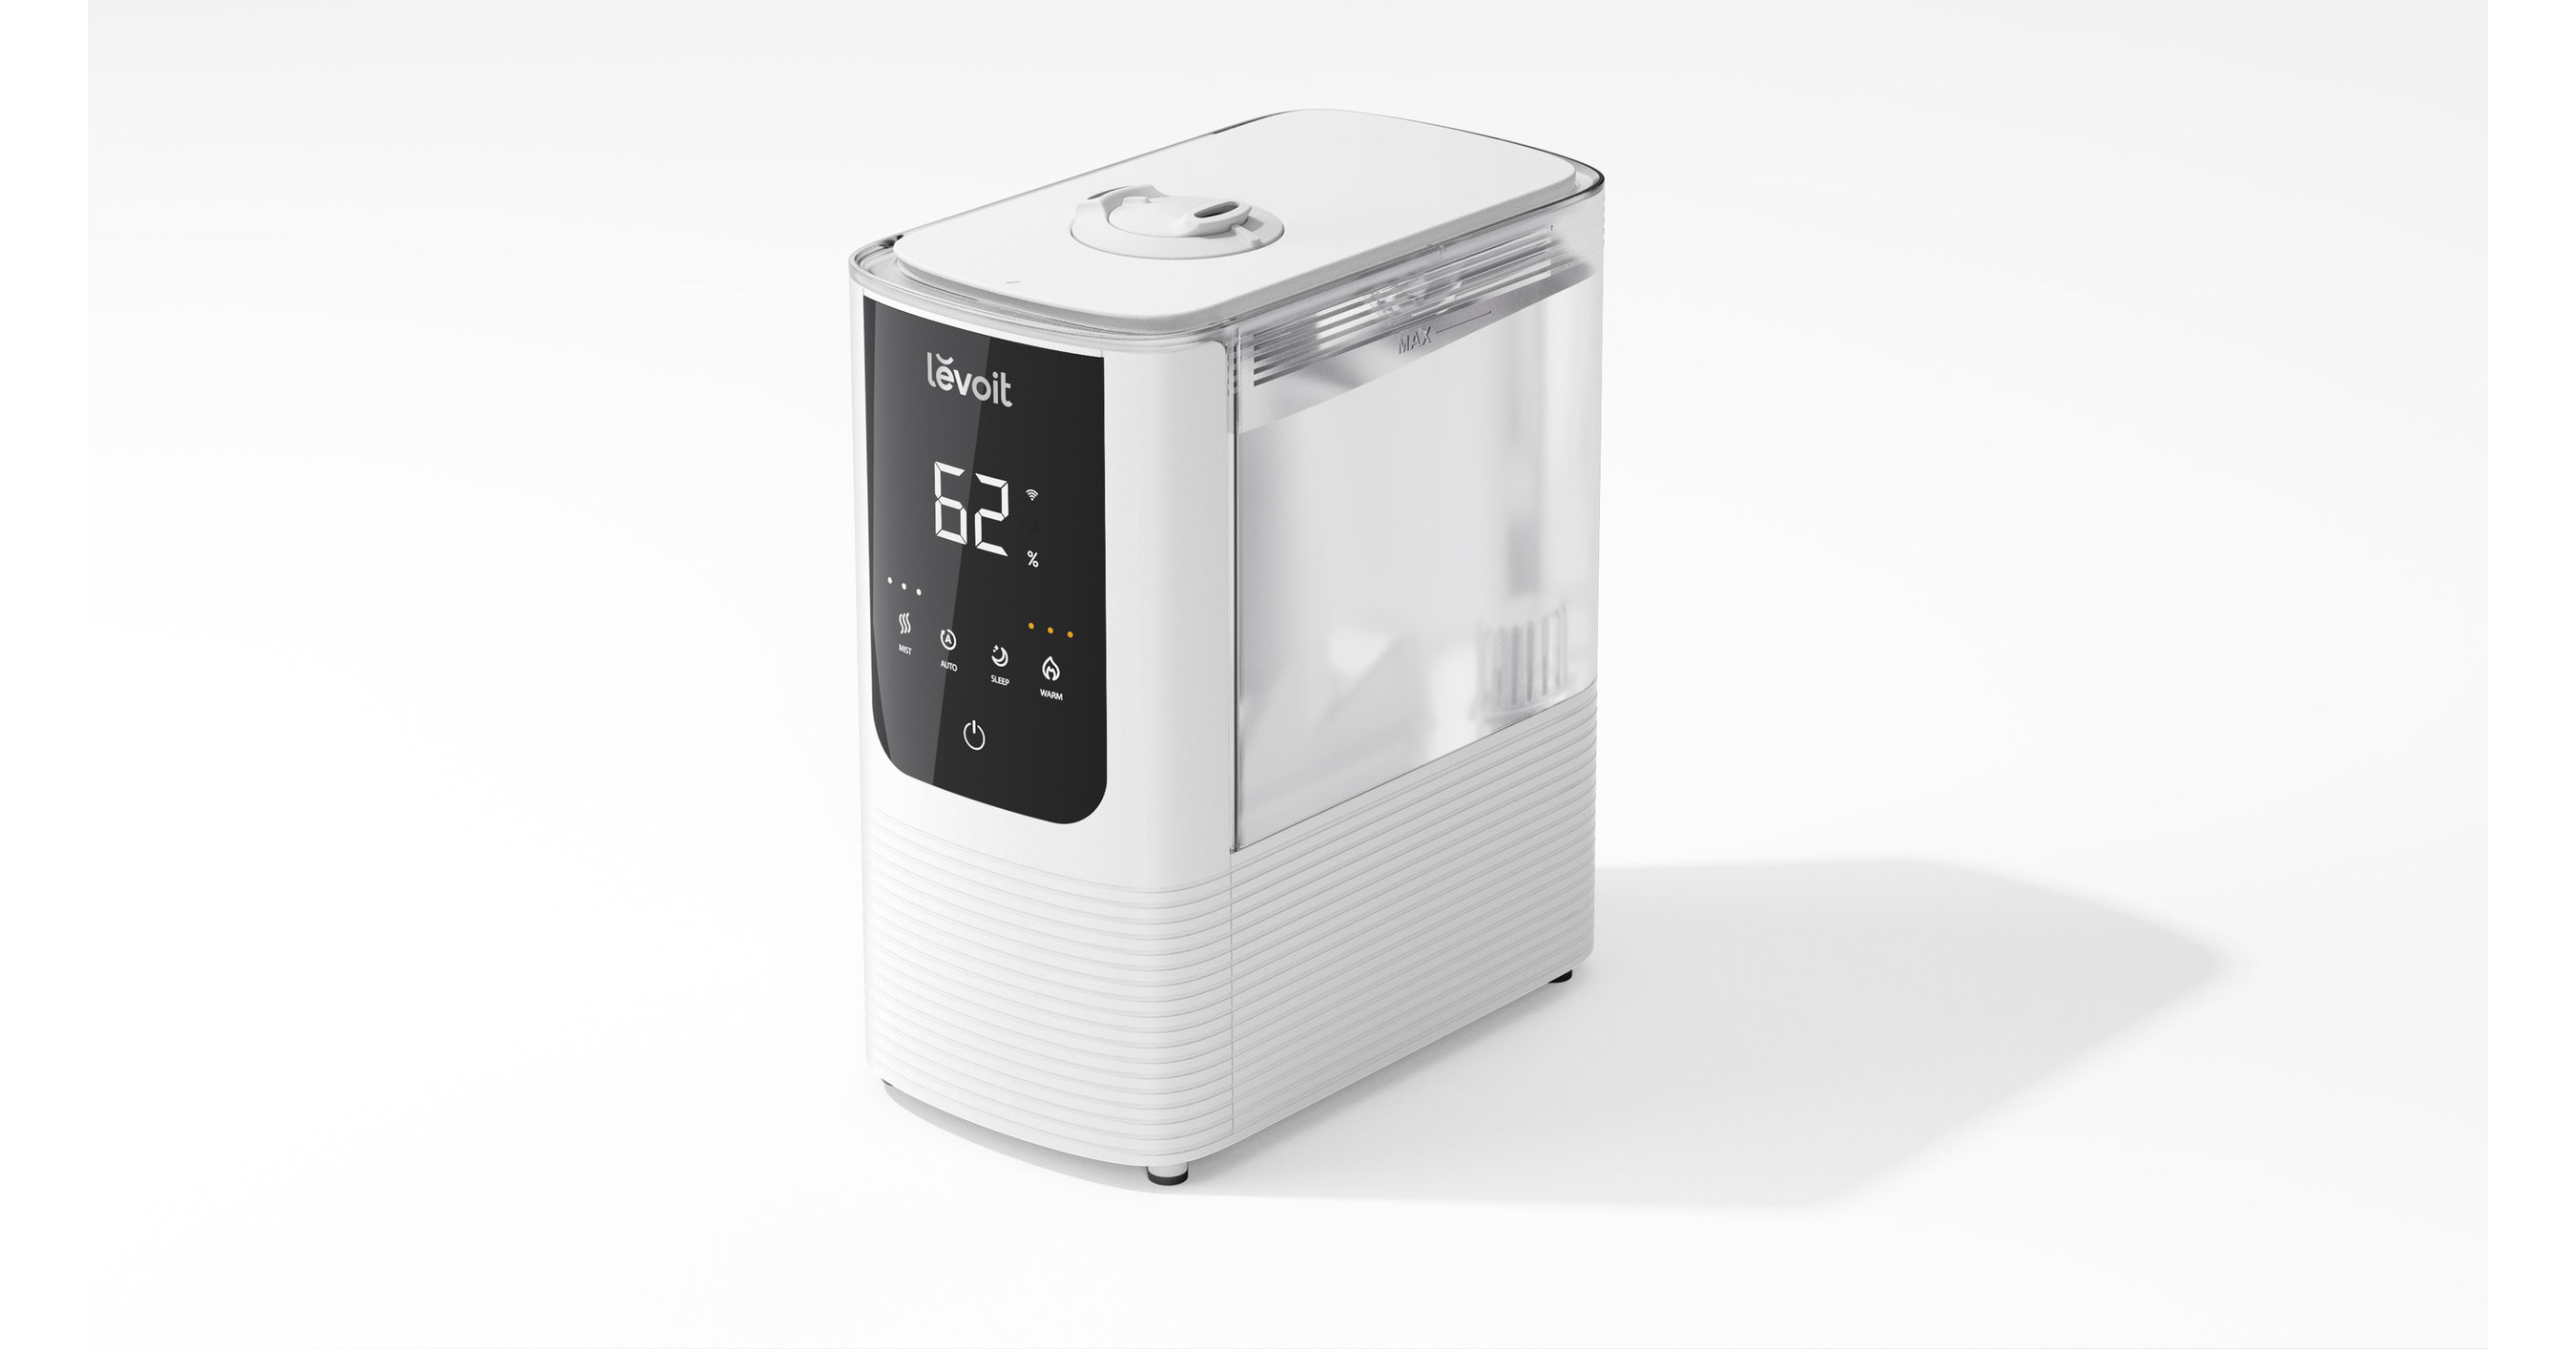 Why We Love the Levoit OasisMist Smart Humidifier: Tried & Tested